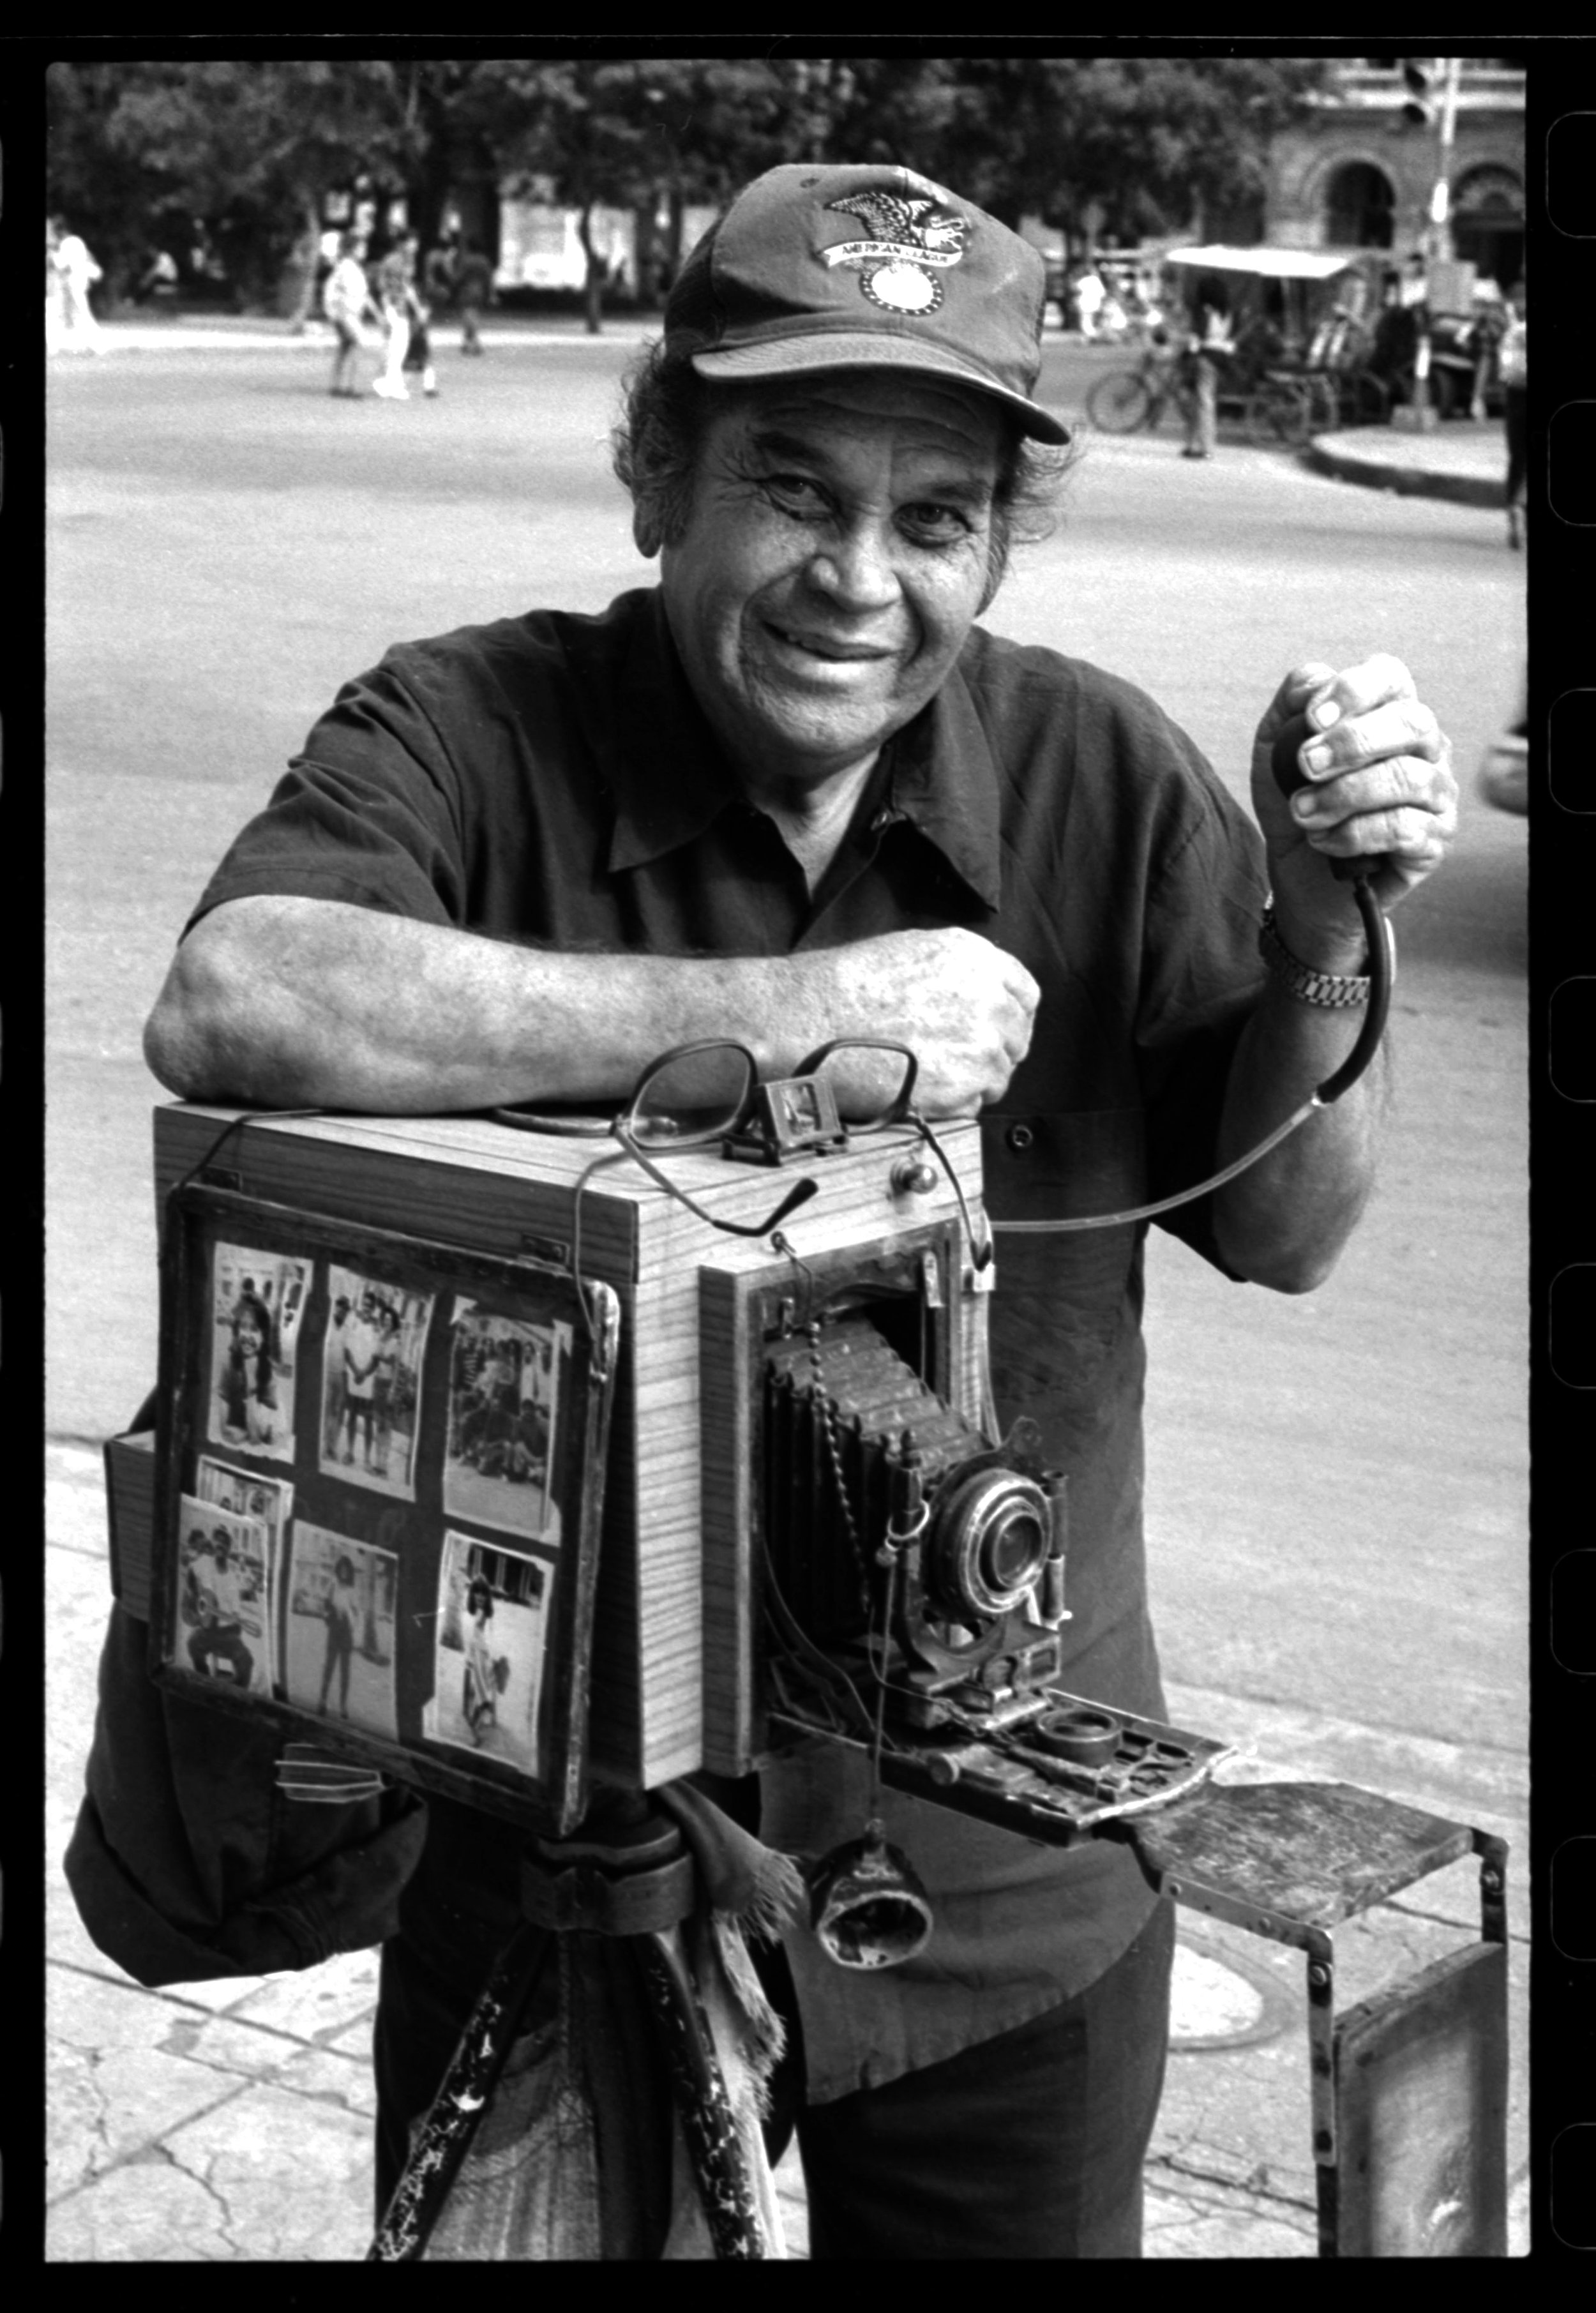  Street portrait photographer using a paper negative process for making prints in order to sell. 